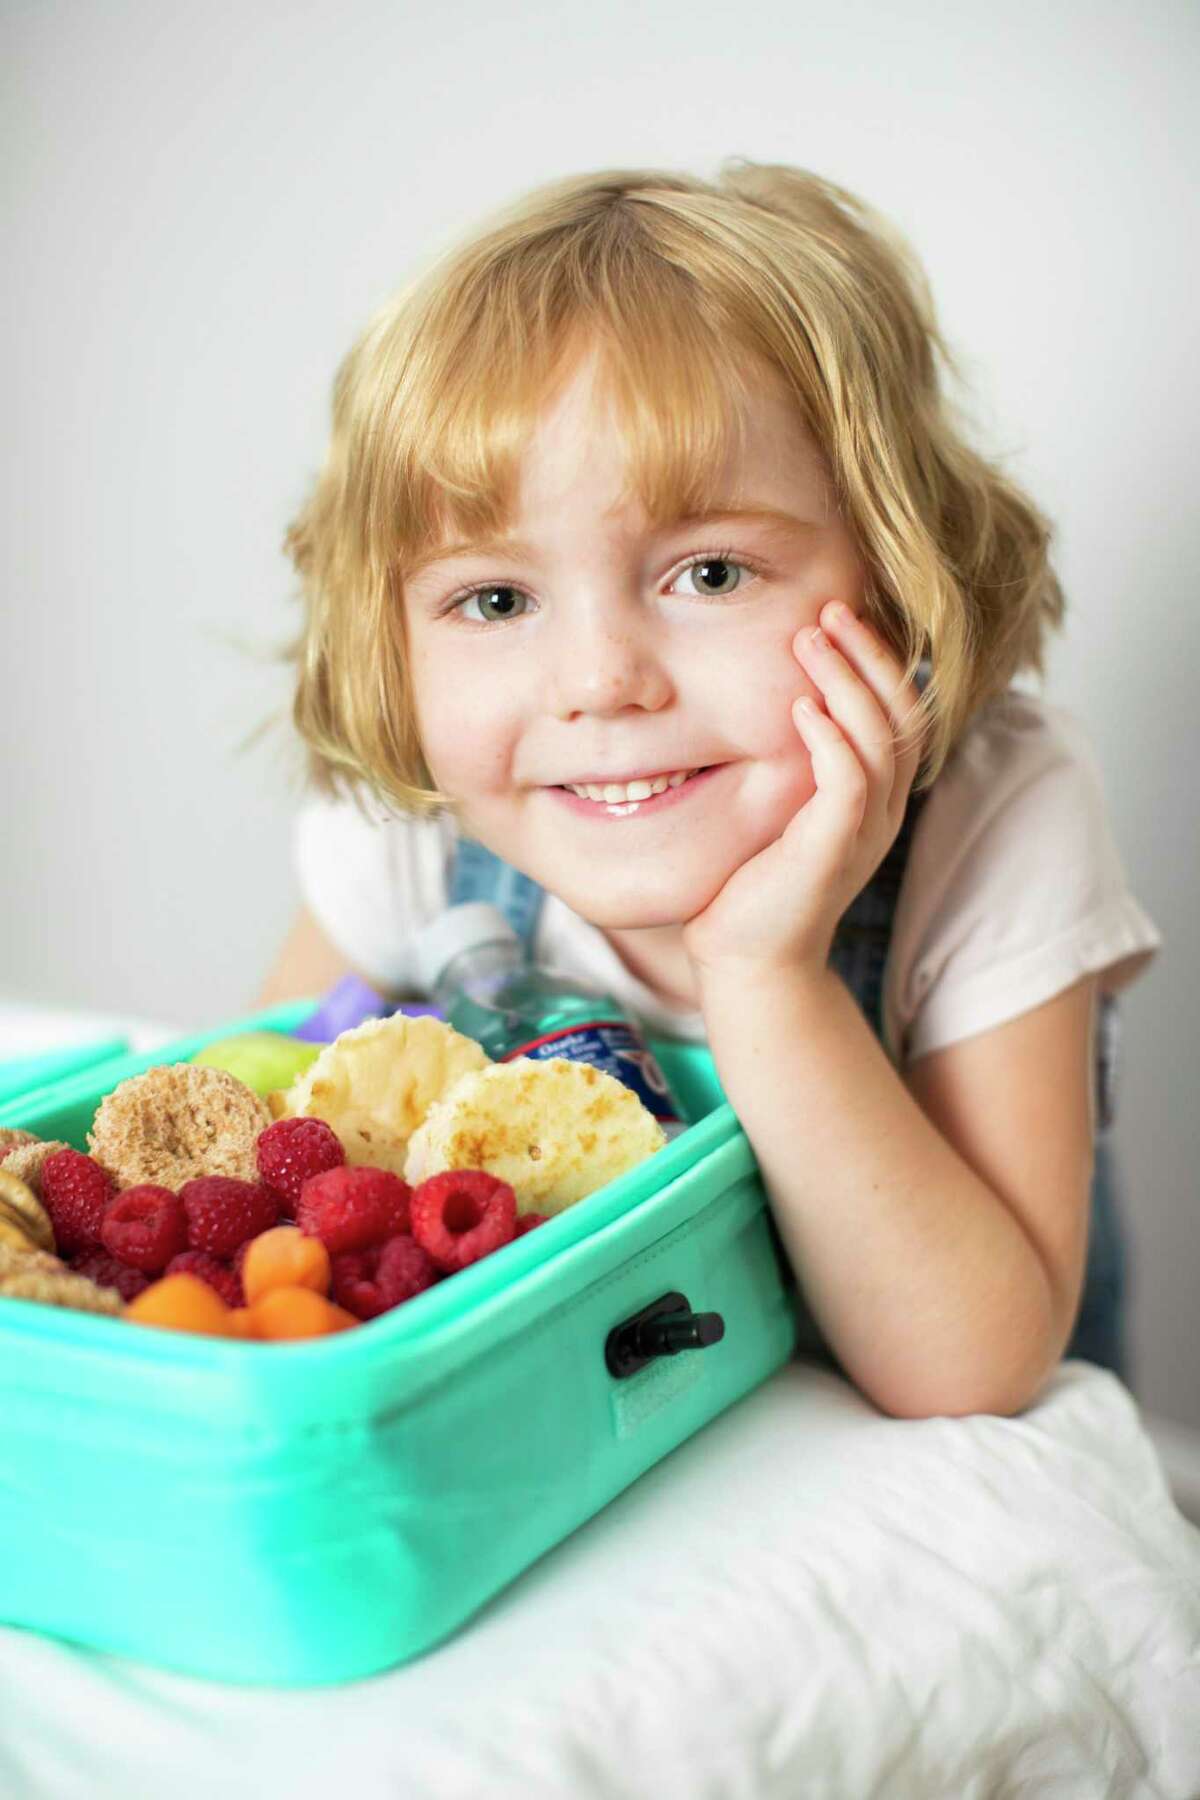 Harper, 5, can’t wait for lunch.